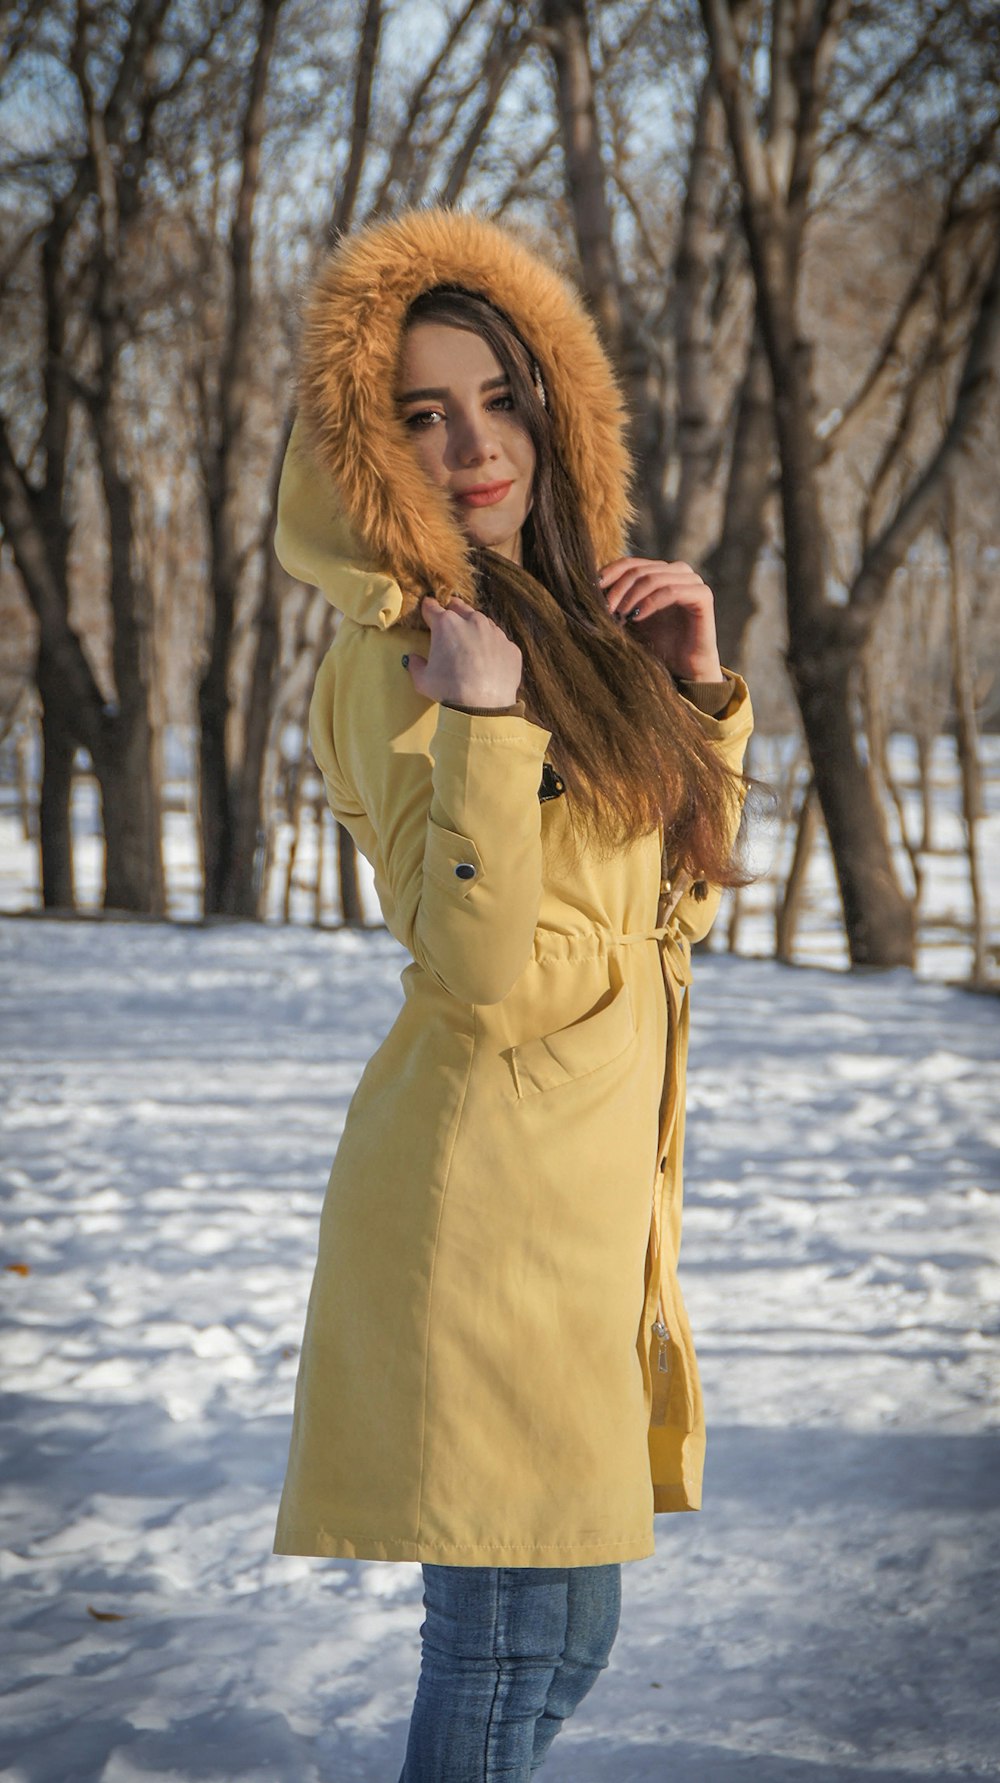 woman in yellow coat standing on snow covered ground during daytime photo –  Free Coat Image on Unsplash